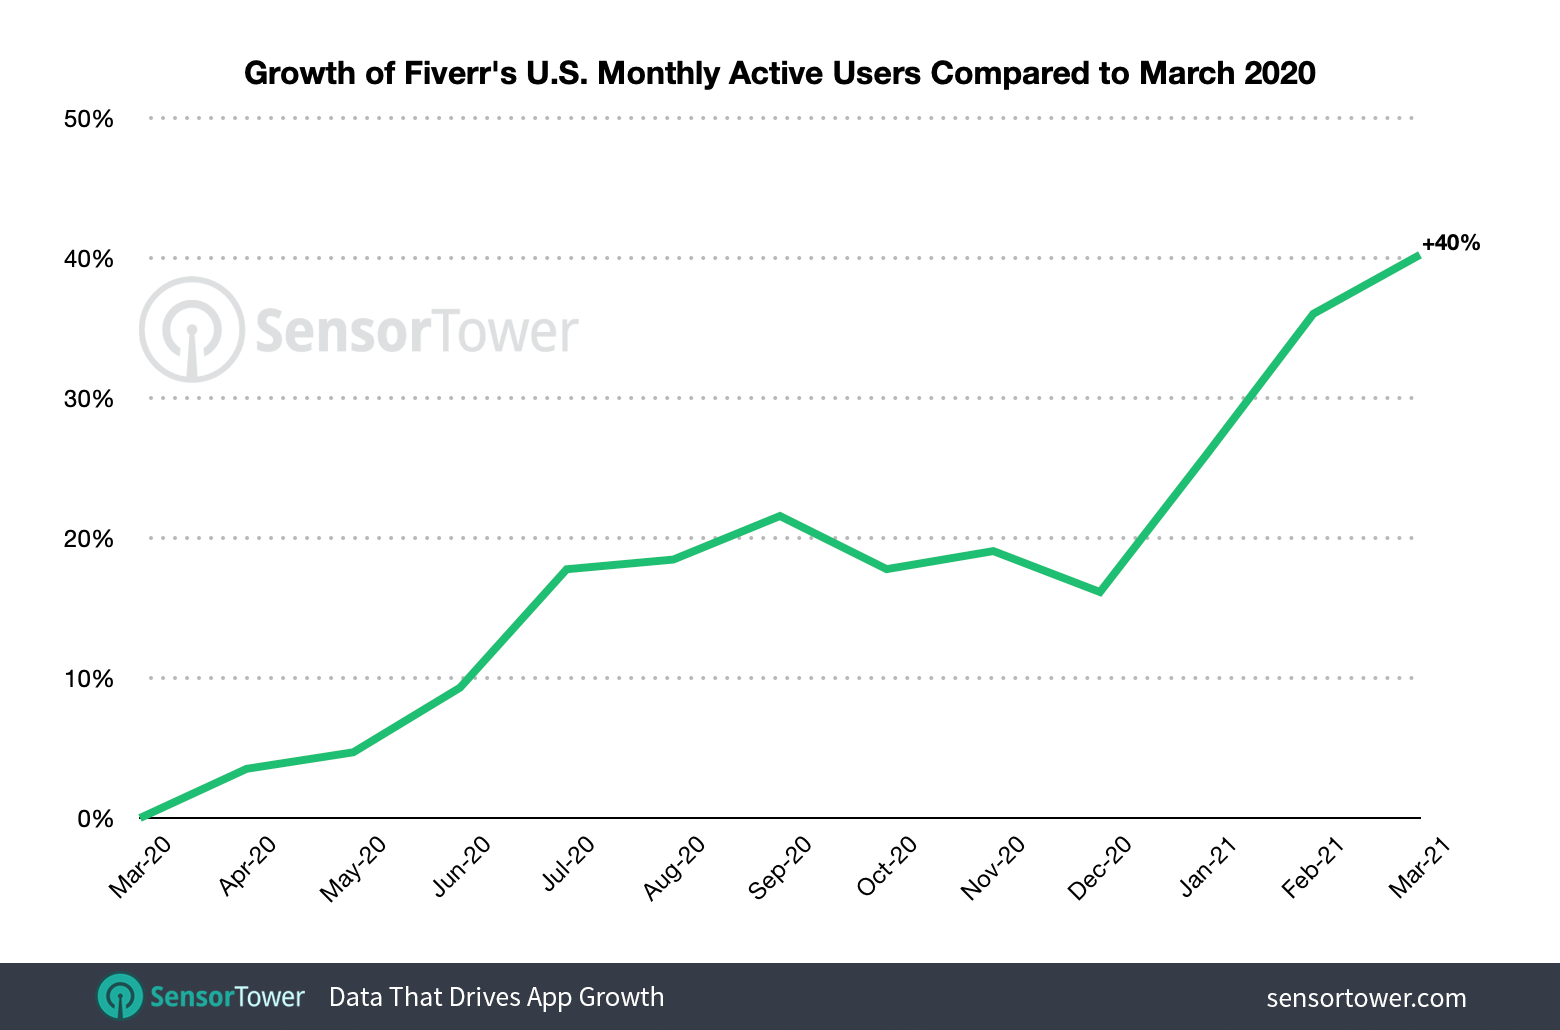 Fiverr's monthly active users, indexed against March 2020, show 40 percent year-over-year growth.